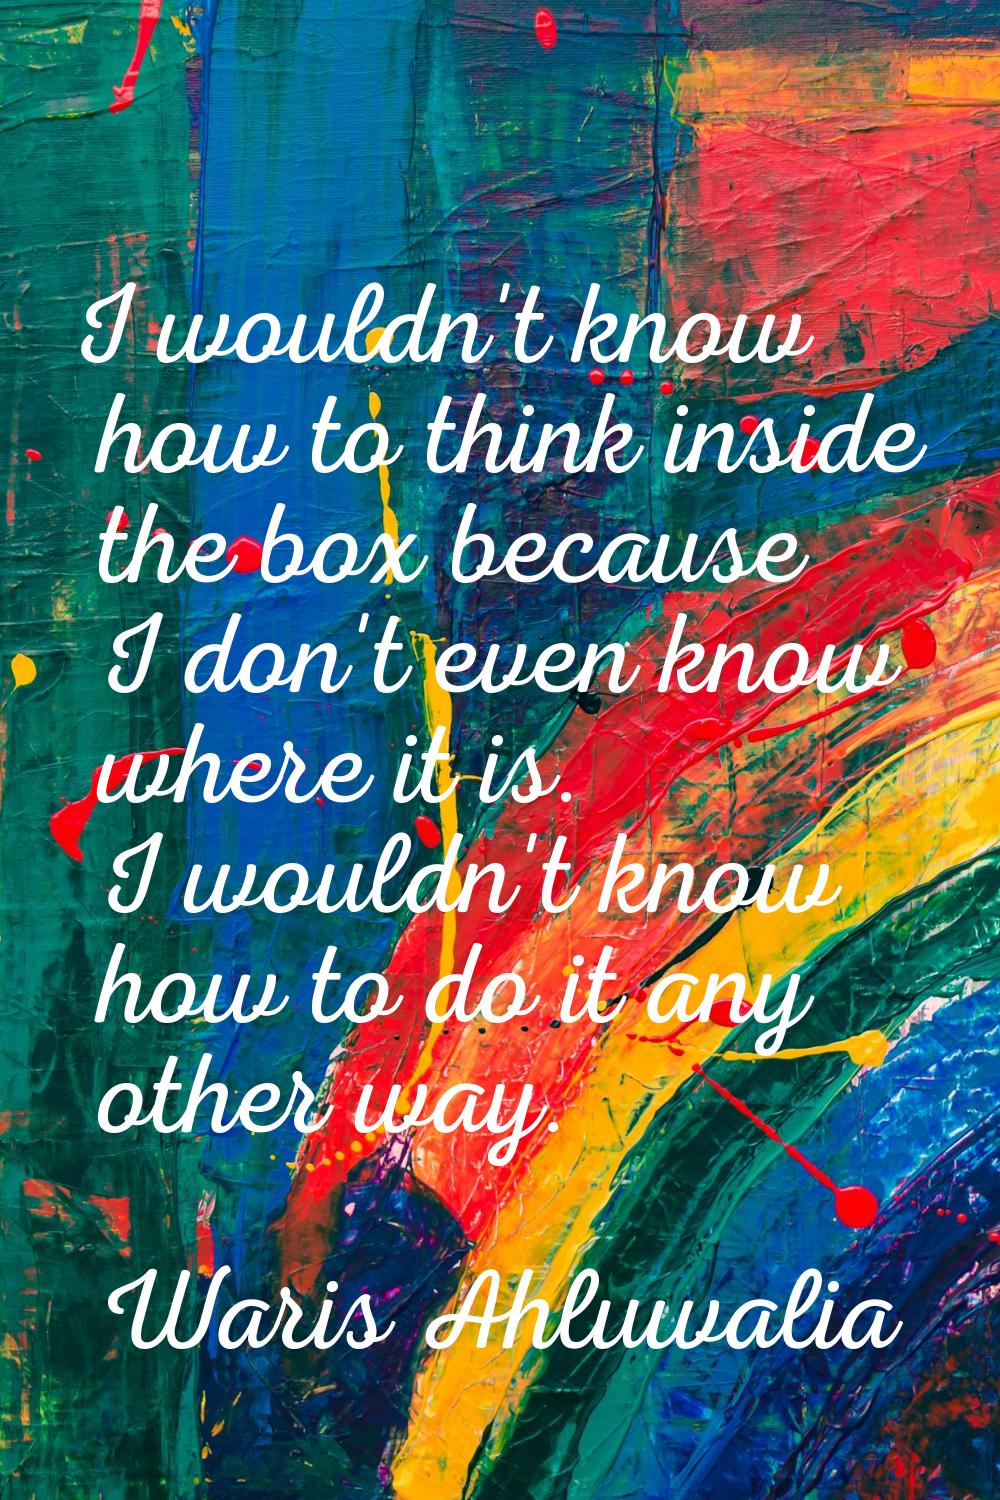 I wouldn't know how to think inside the box because I don't even know where it is. I wouldn't know 